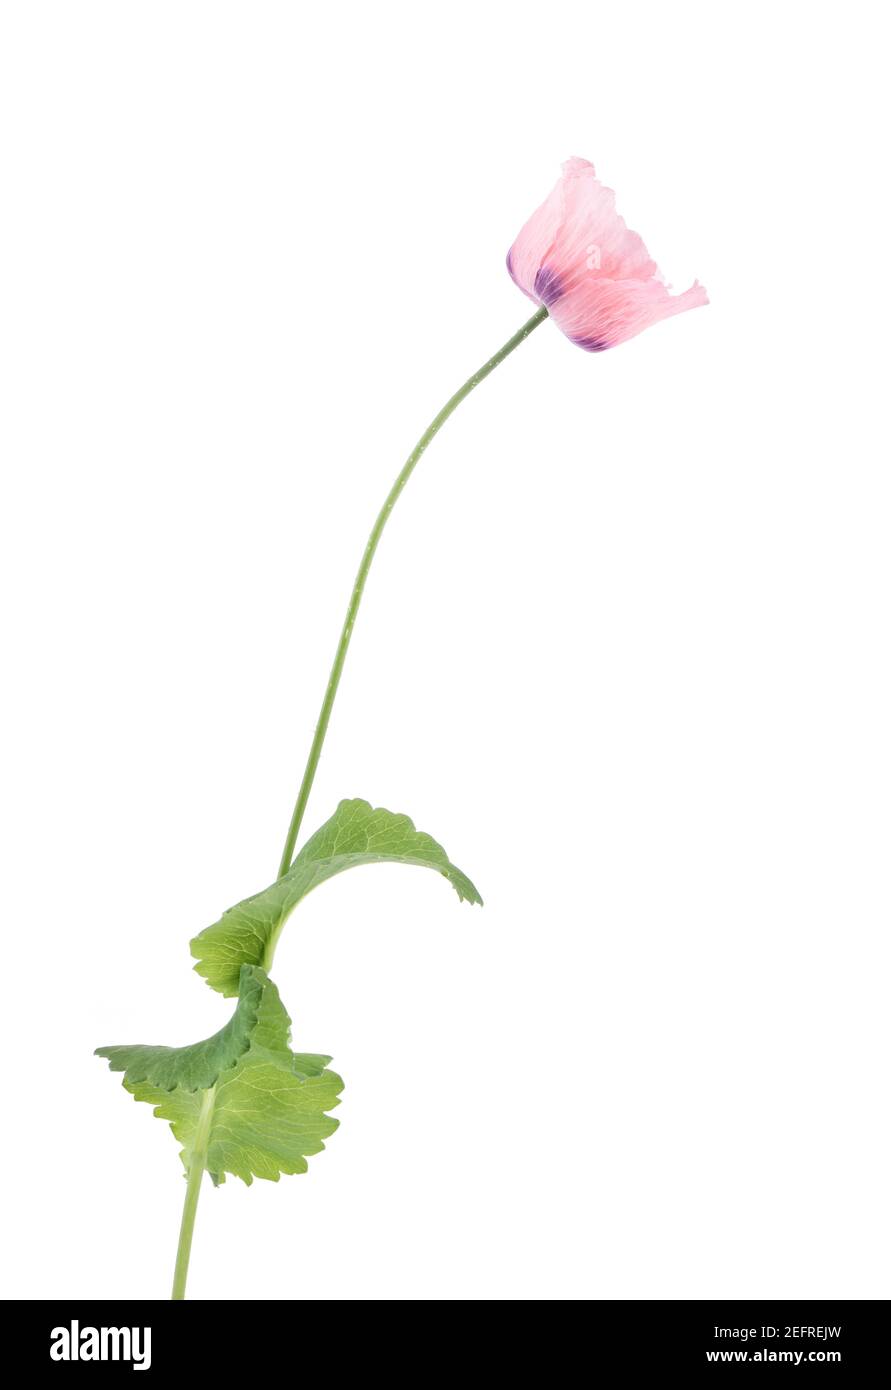 Pink Peony Poppy flower on a stem with green leaves. Papaver somniferum, Peoniflorum. Pink Paeony, Opium Poppy with light pink, translucent petals. Si Stock Photo